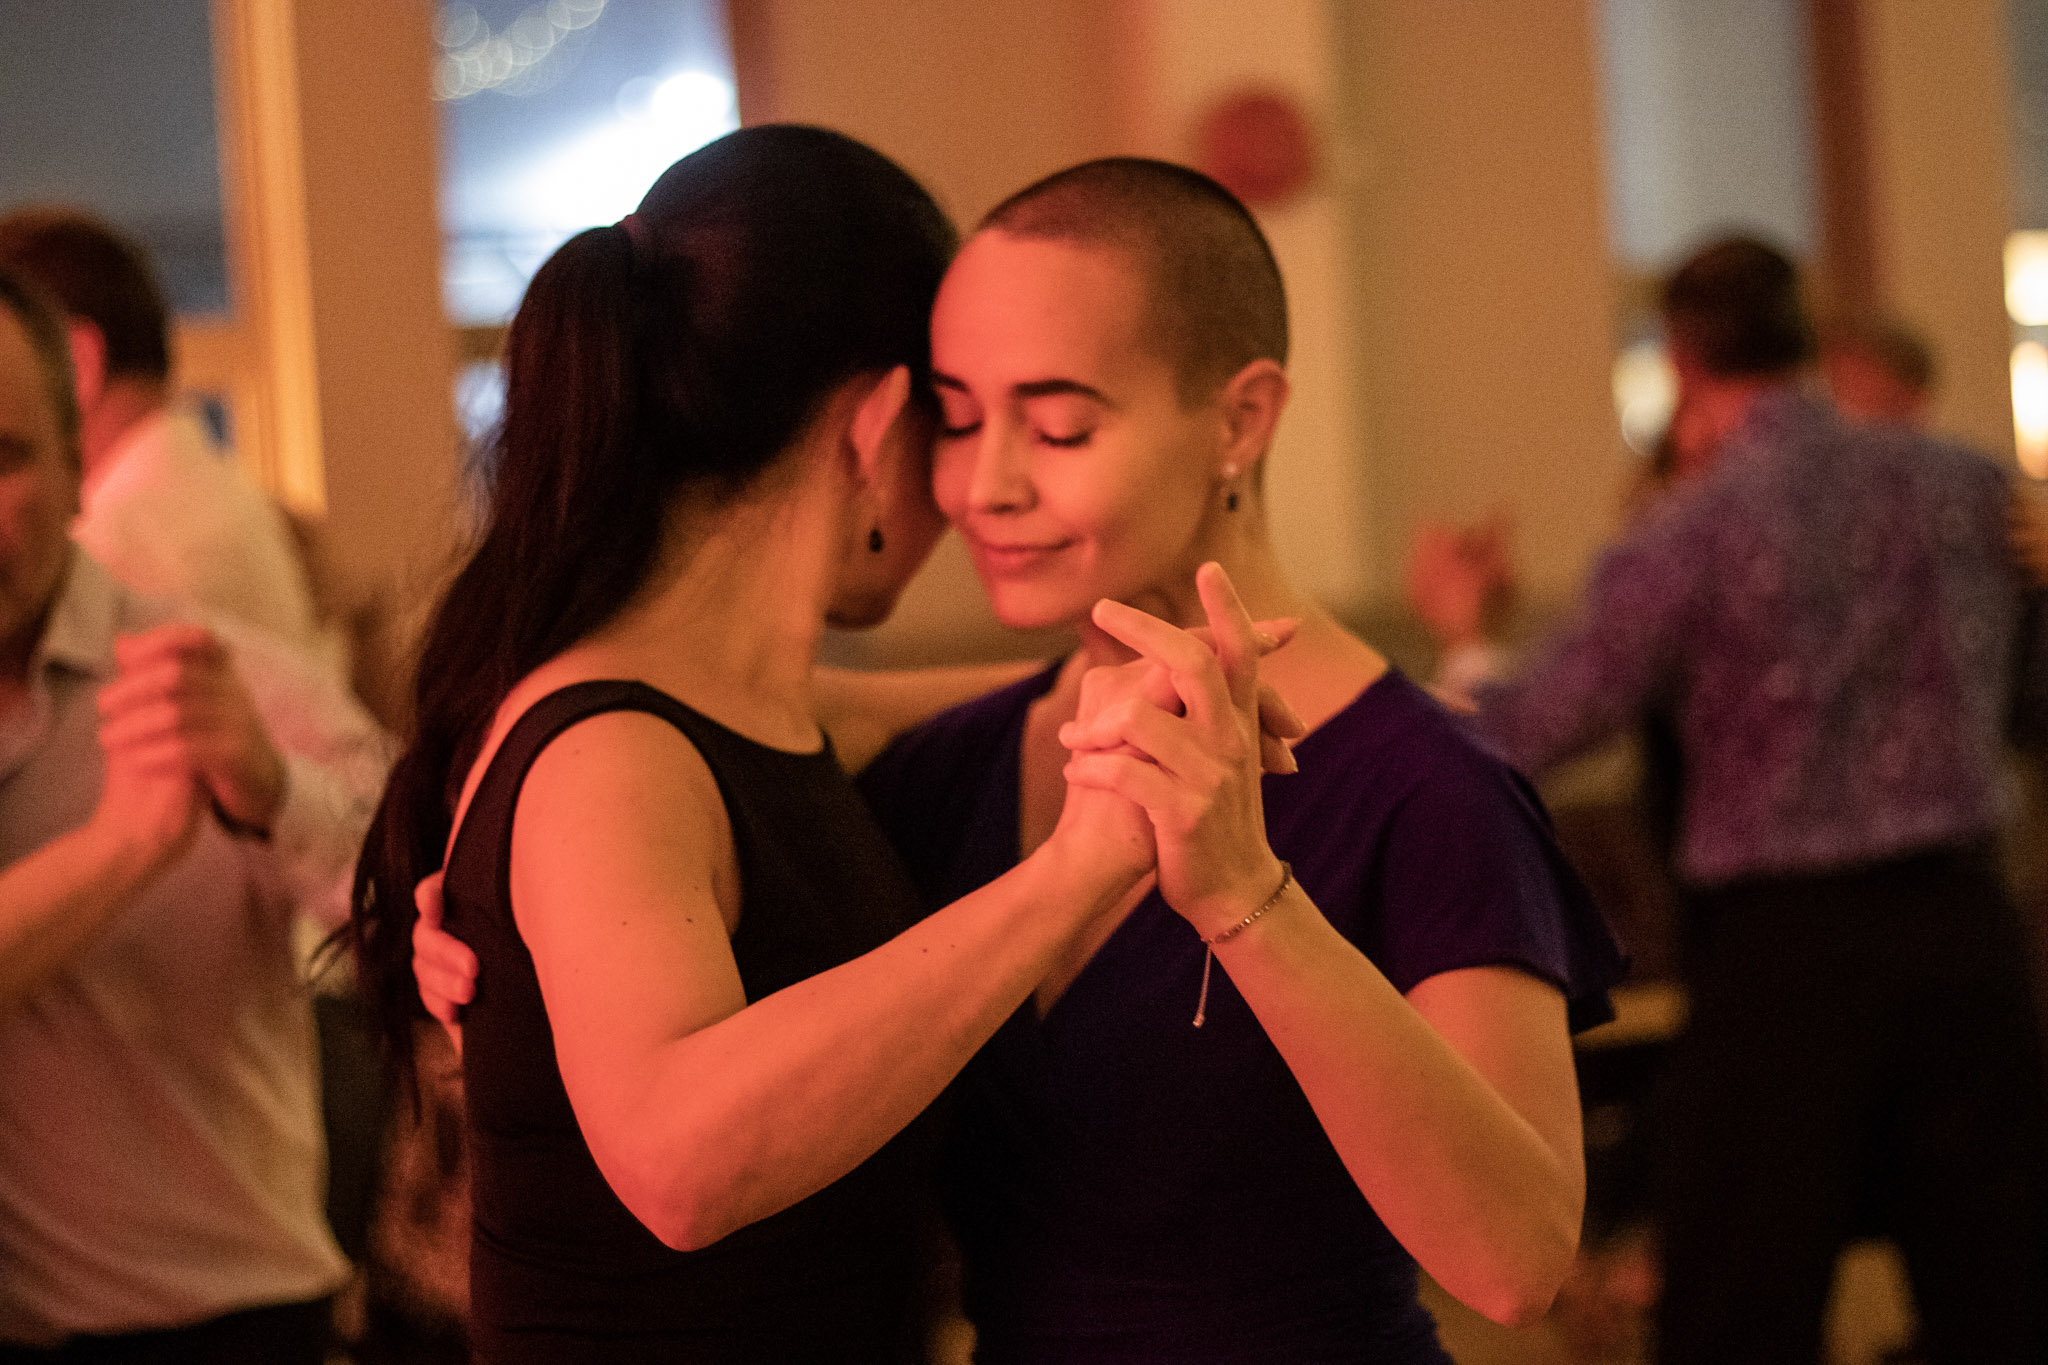 Two women dance together, cheek to cheek. The camera focus’ on the hands clasped together. In the background, slightly out of focus is the face of the woman who leads, her eyes closed. She is smiling. 